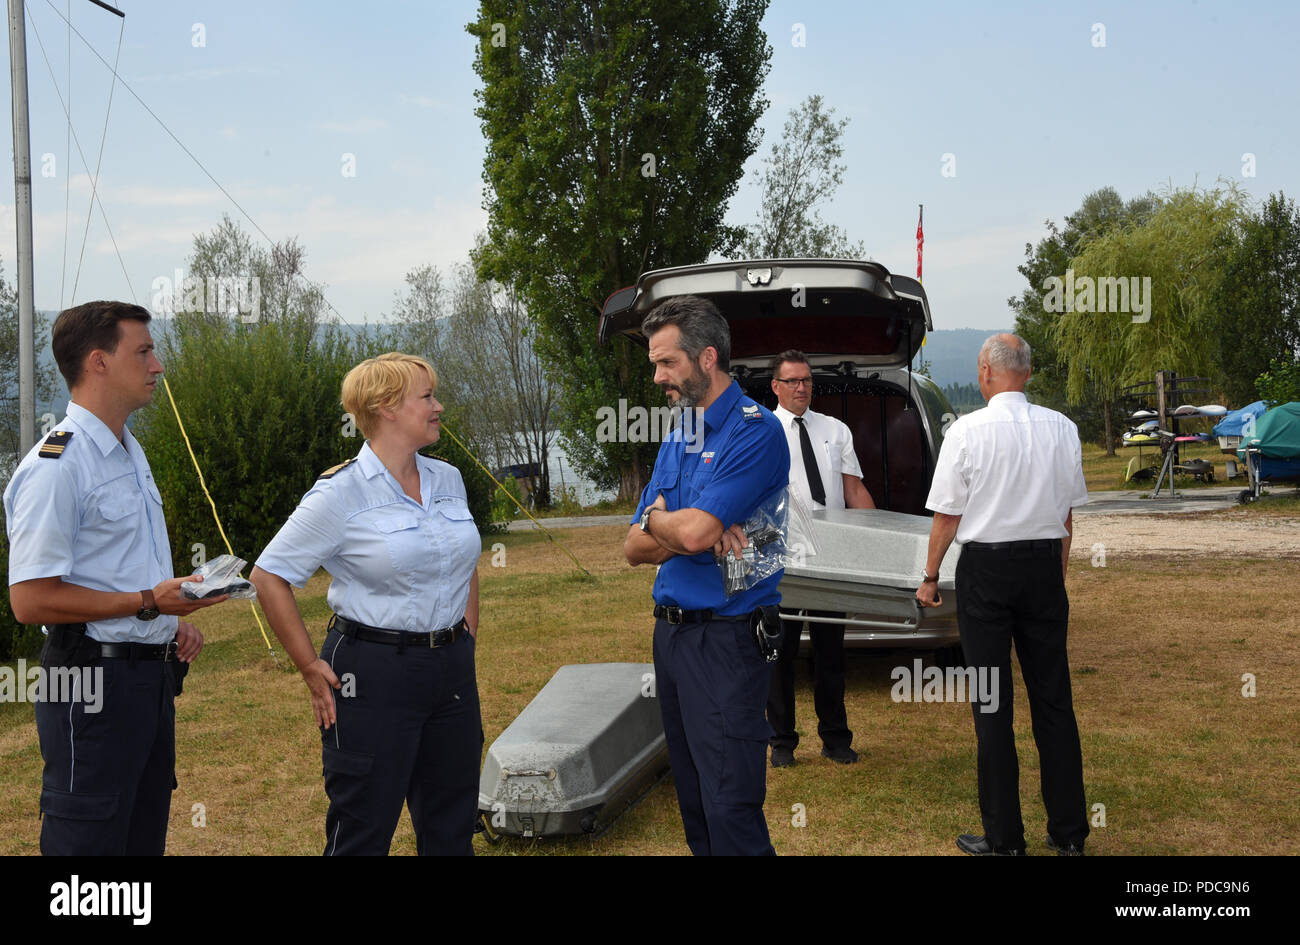 Radolfzell, Germany. 08th Aug, 2018. The actors Simon Werdeles (in the role of Pirmin Spitznagel, L-R), Floriane Daniel (in the role of Nele Fehrenbach) and Martin Rapold (in the role of Captain Adrian Aubry), are shooting a scene for the series 'WaPo Bodensee' (lit. Water Police Lake Constance), episode 'Seidenstrasse' (lit. silk street). The series is to be broadcasted on the German TV channel ARD at the beginning of 2019 on Tuesdays at 6.50 p.m. Credit: Ursula Düren/dpa/Alamy Live News Stock Photo